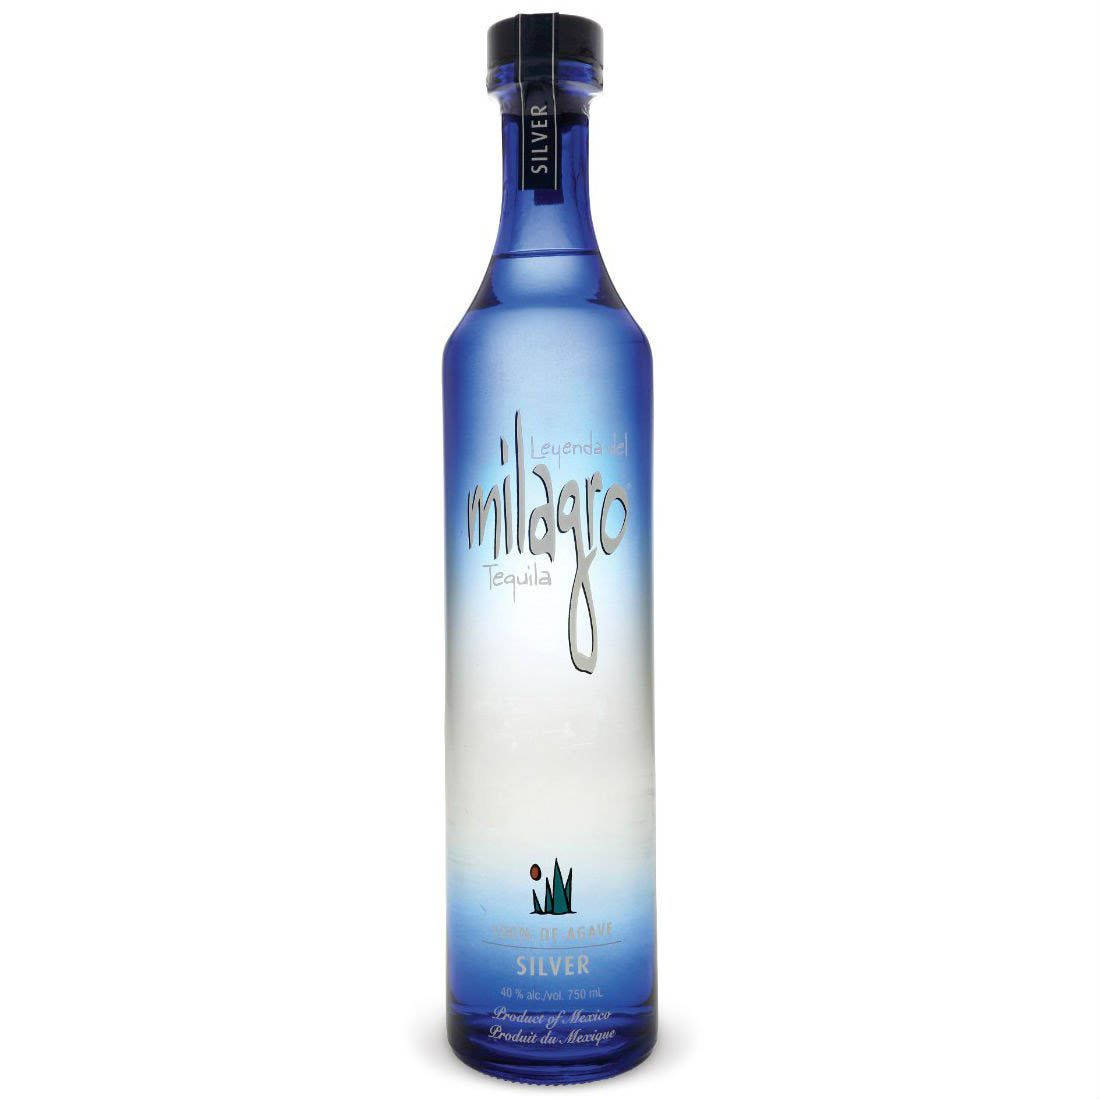 Milagrotequila Silver Wallpaper